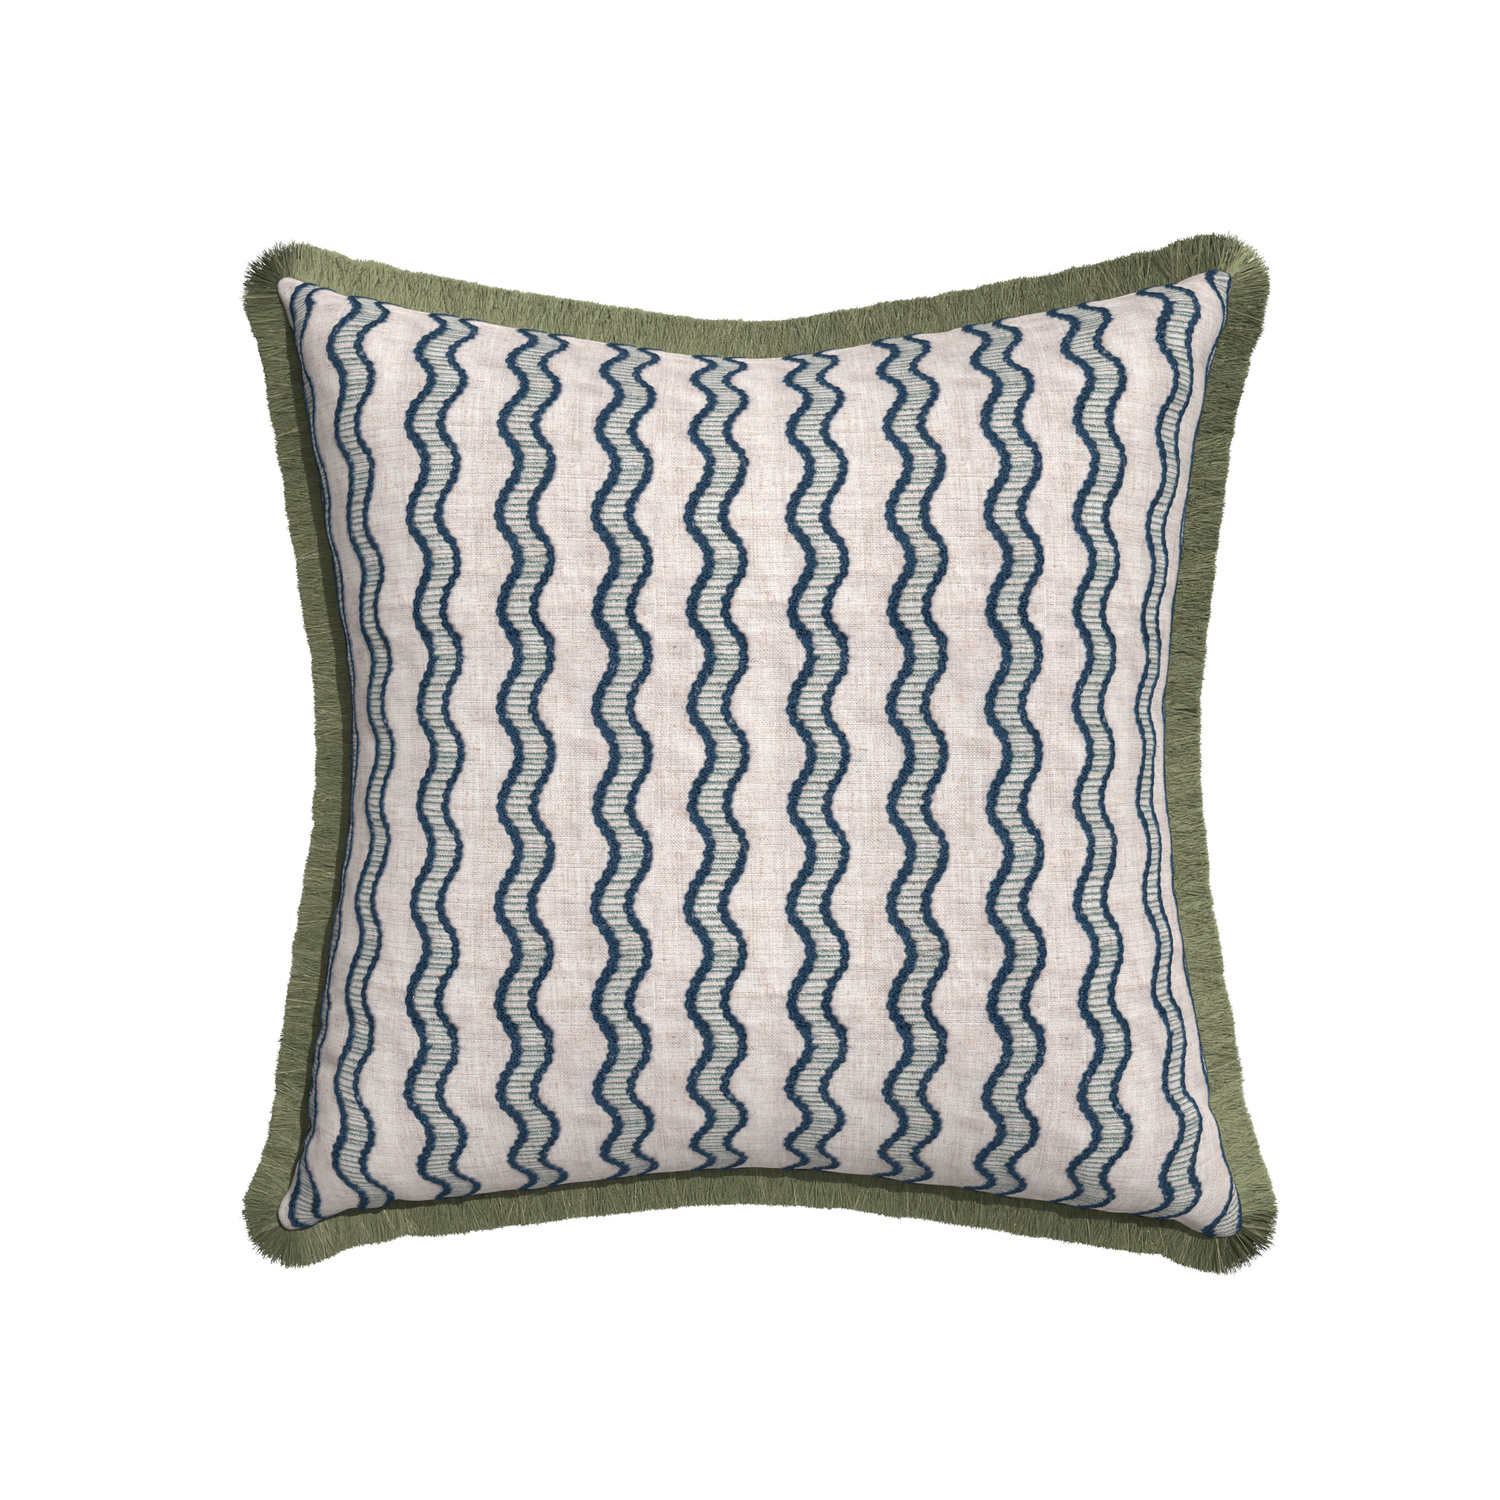 22-square beatrice custom embroidered wavepillow with sage fringe on white background